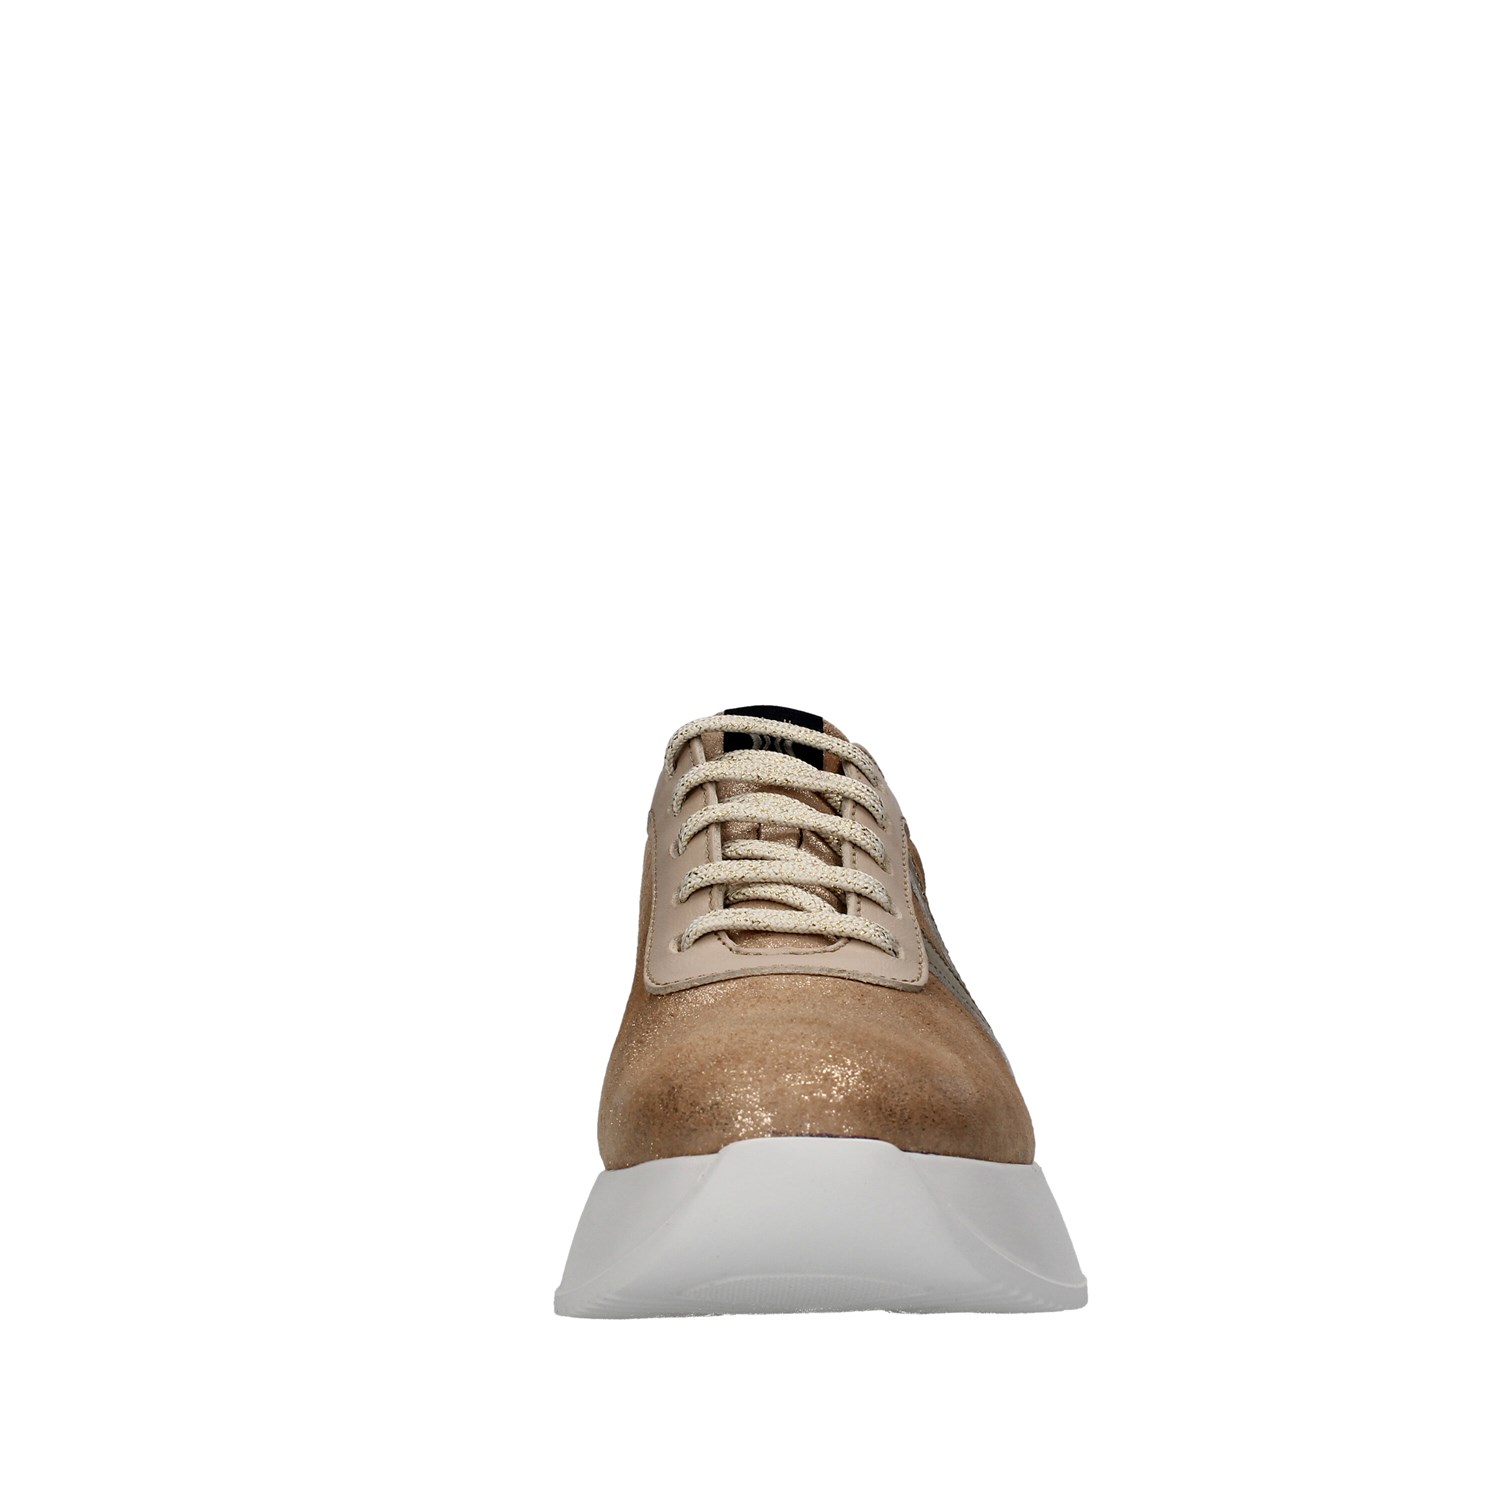 Callaghan 51201 BEIGE Shoes Woman